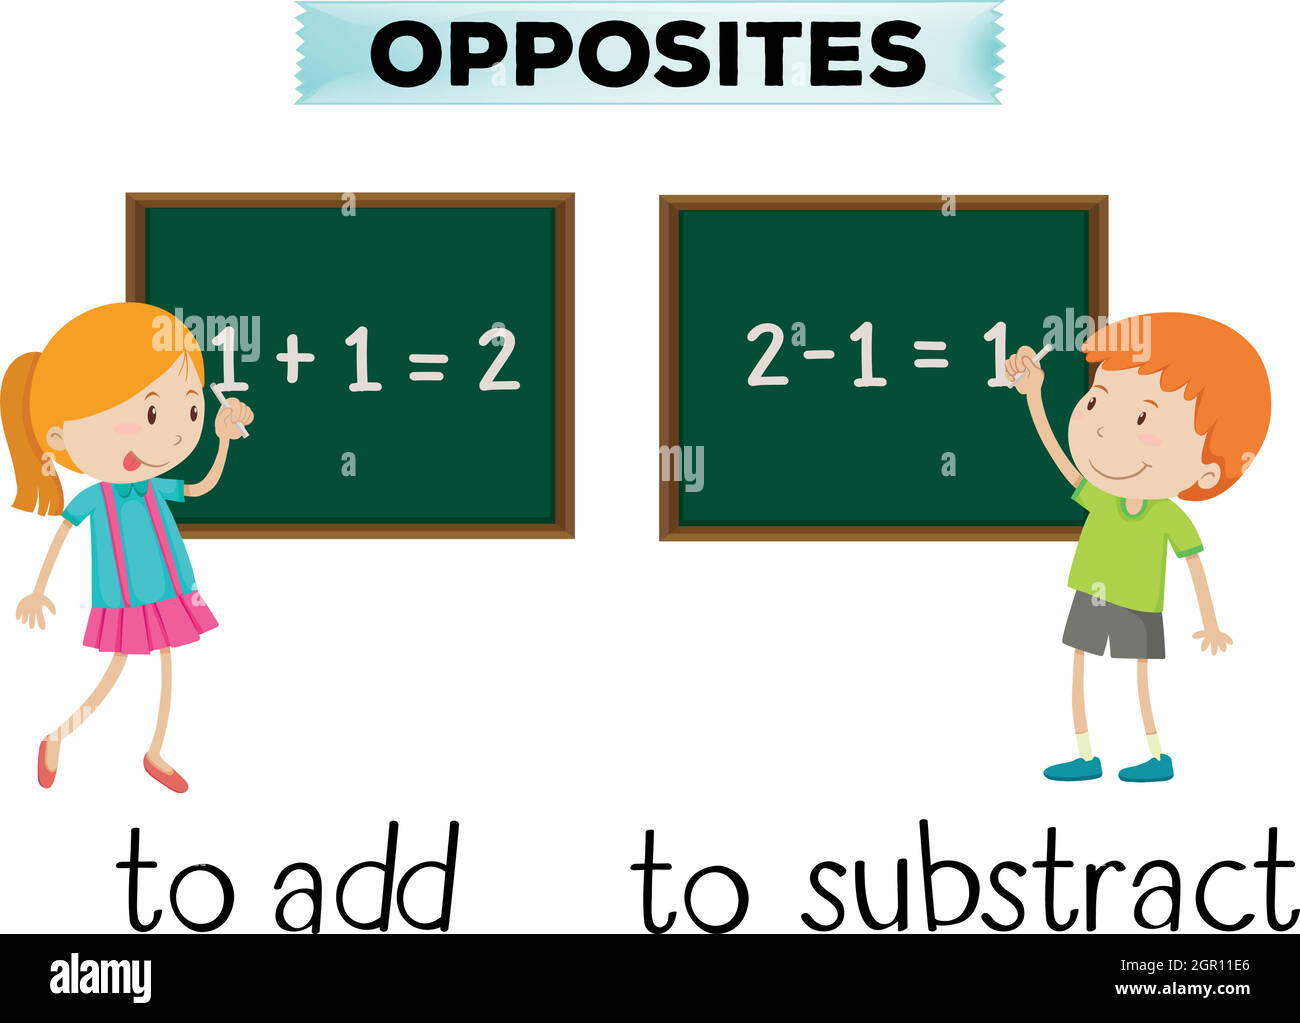 Opposite words for add and subtract Stock Vector